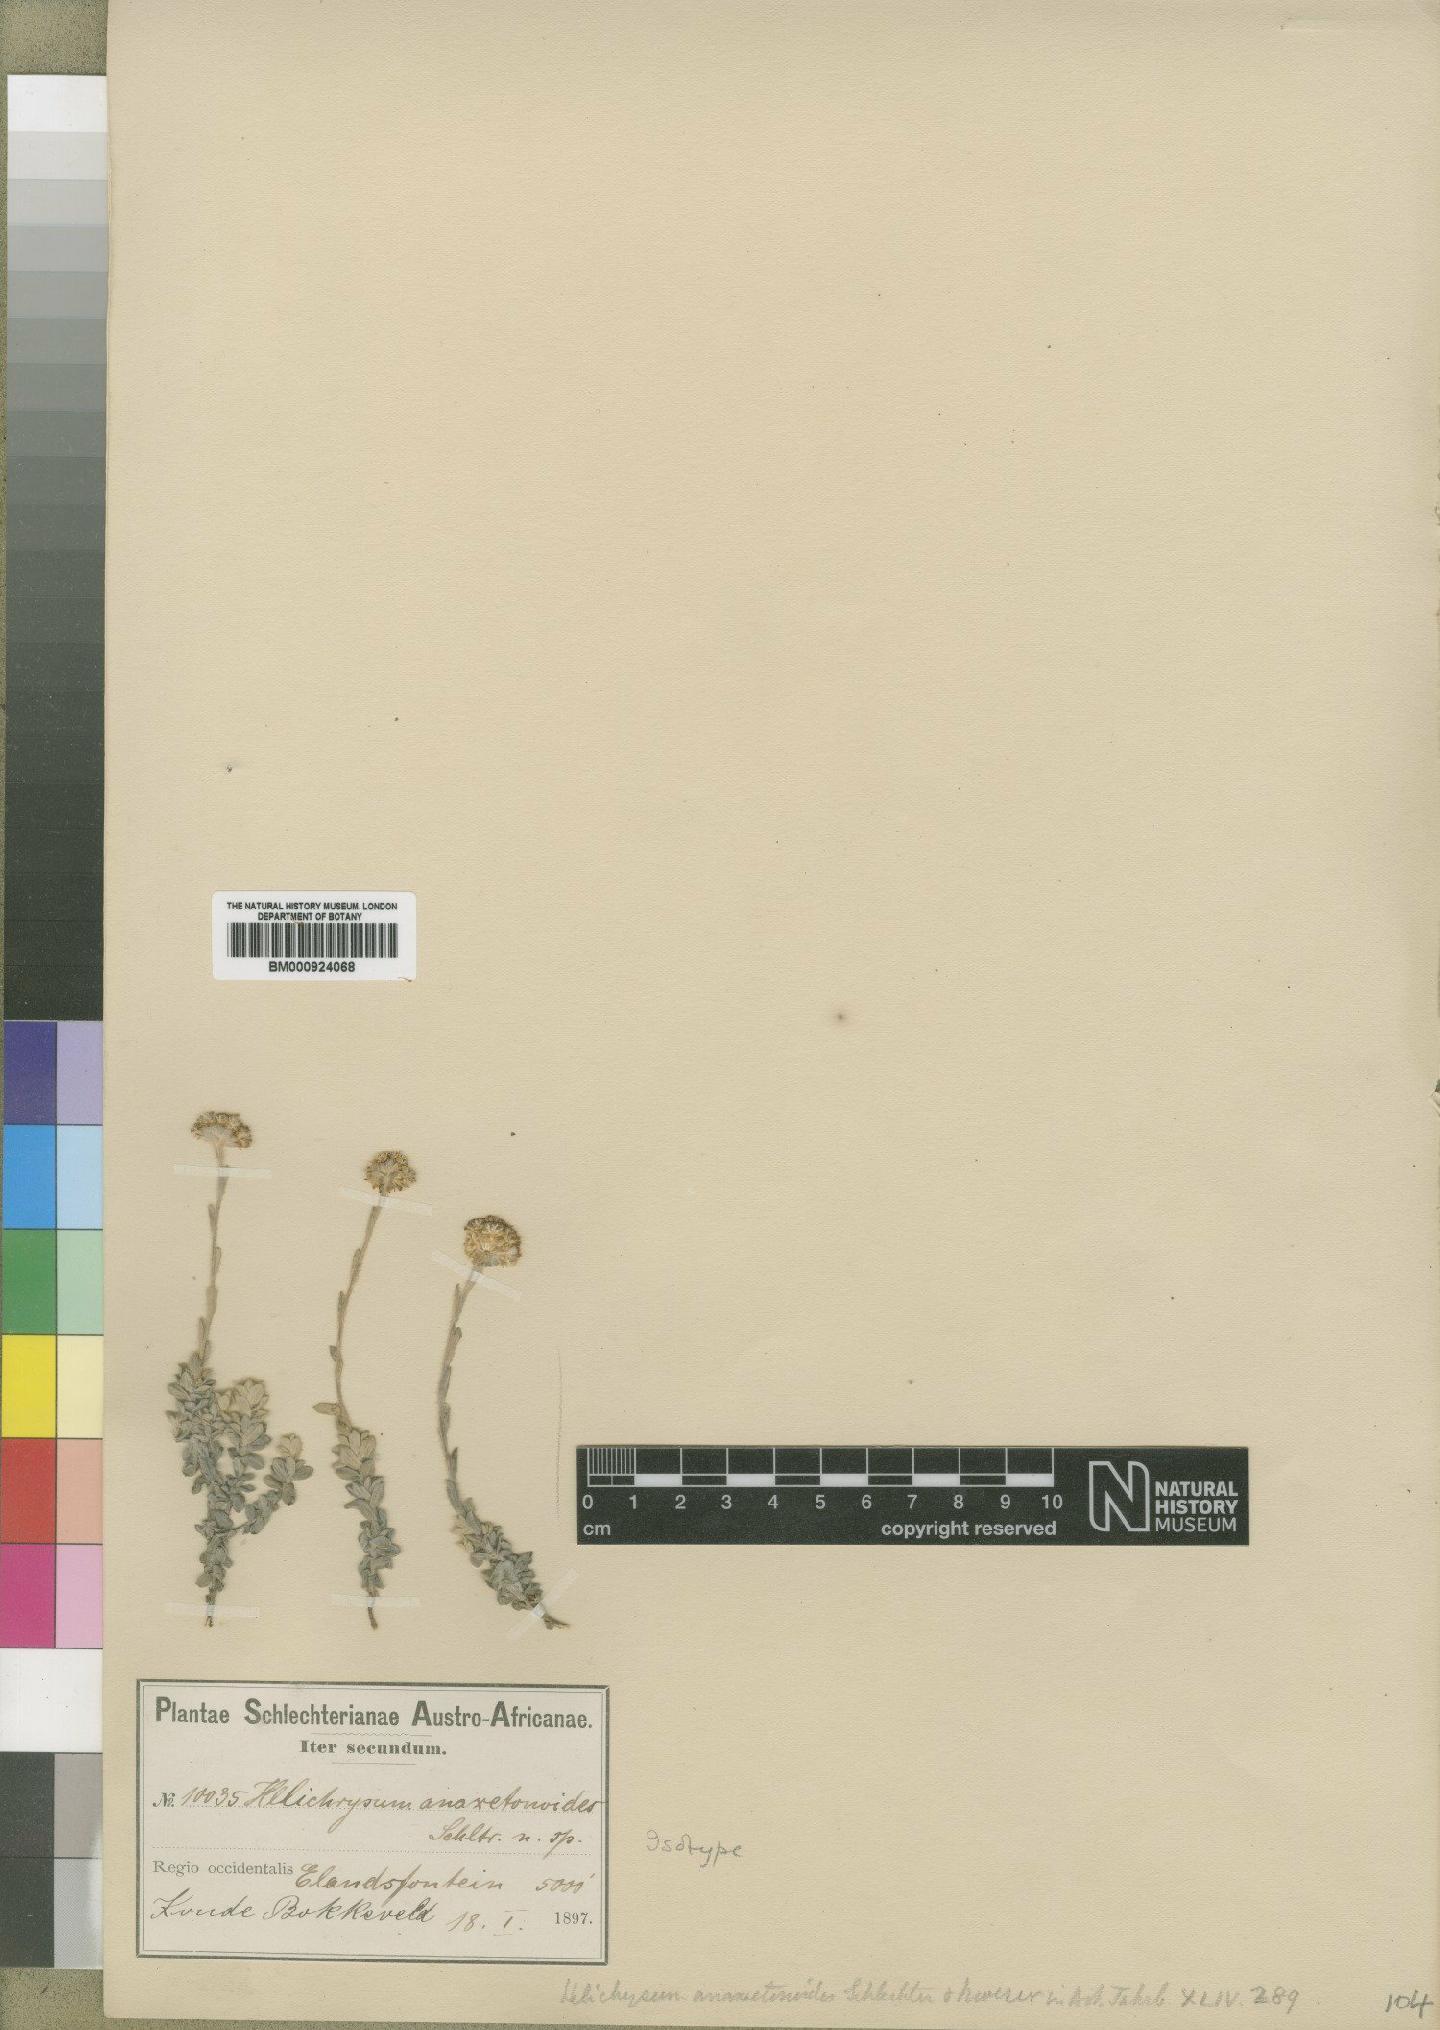 To NHMUK collection (Helichrysum anaxetonoides Schltr. & Moeser; Isotype; NHMUK:ecatalogue:4529096)